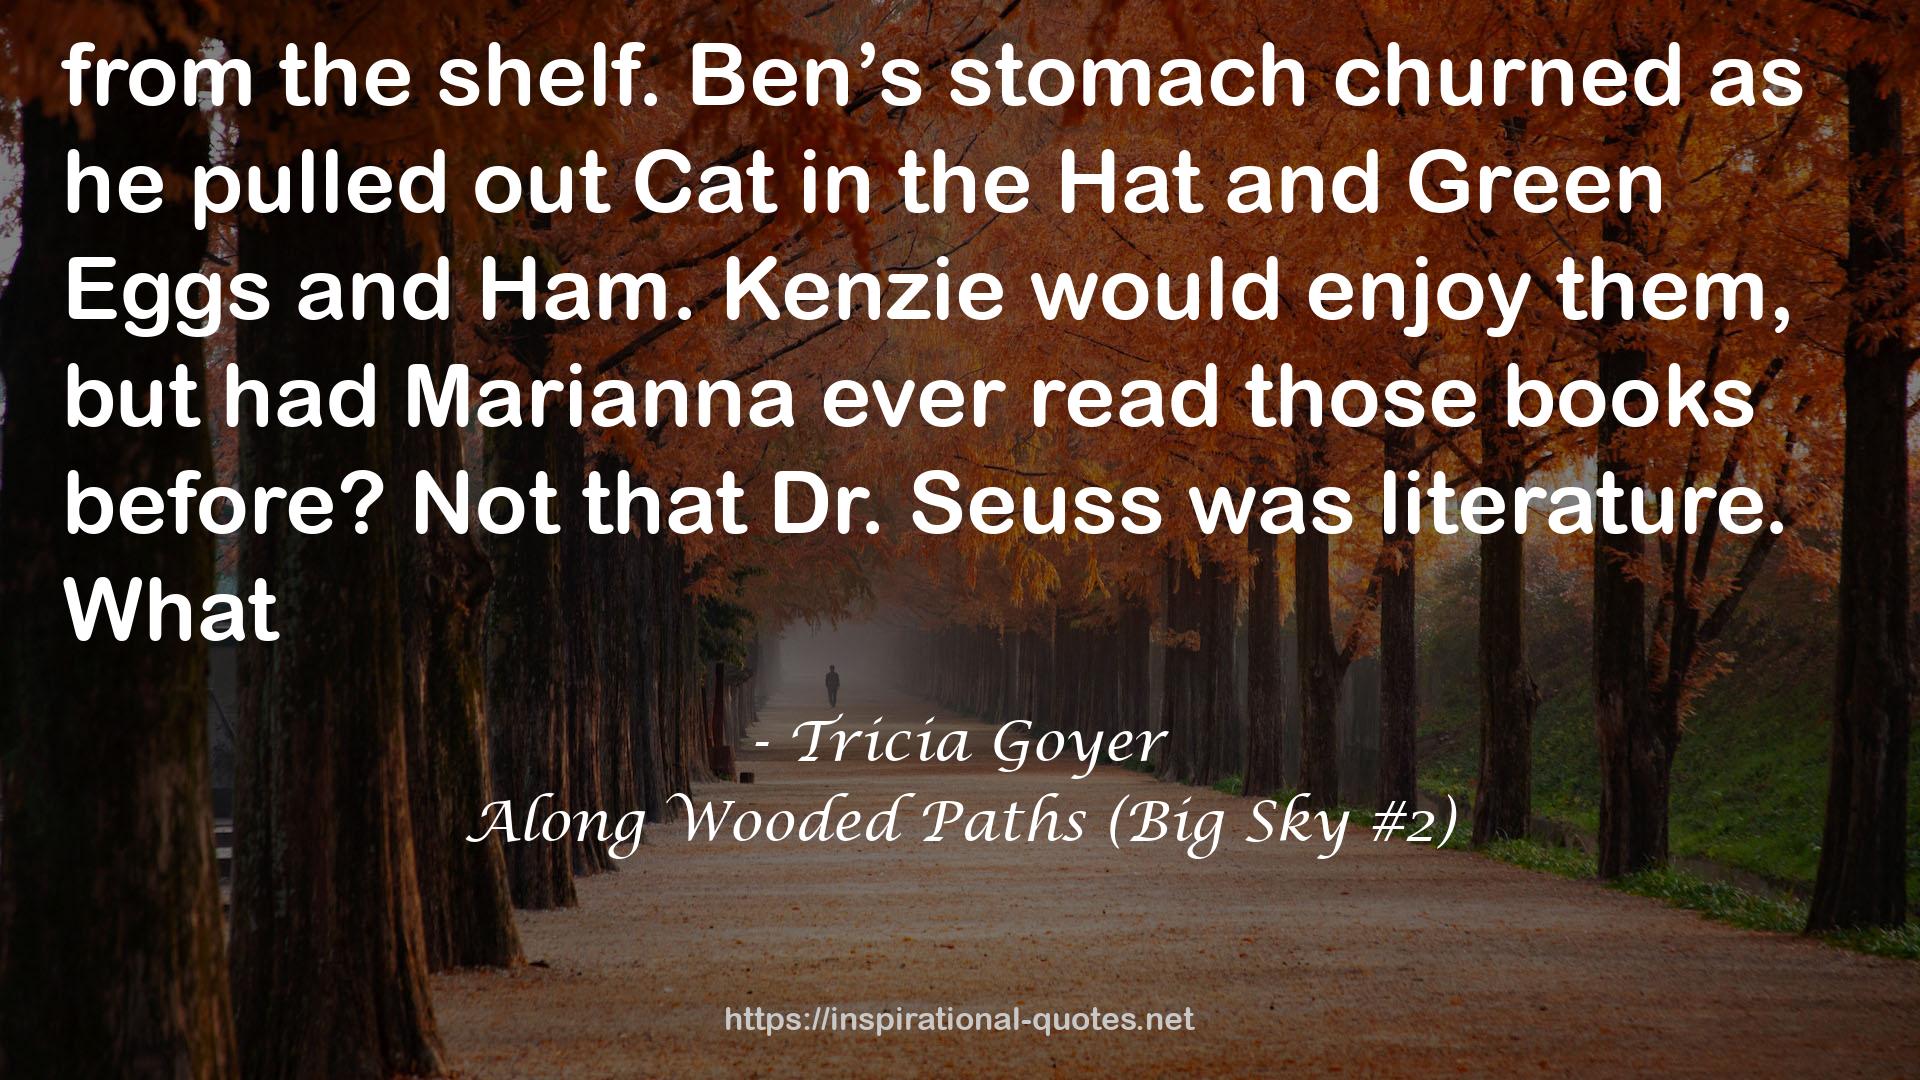 Along Wooded Paths (Big Sky #2) QUOTES